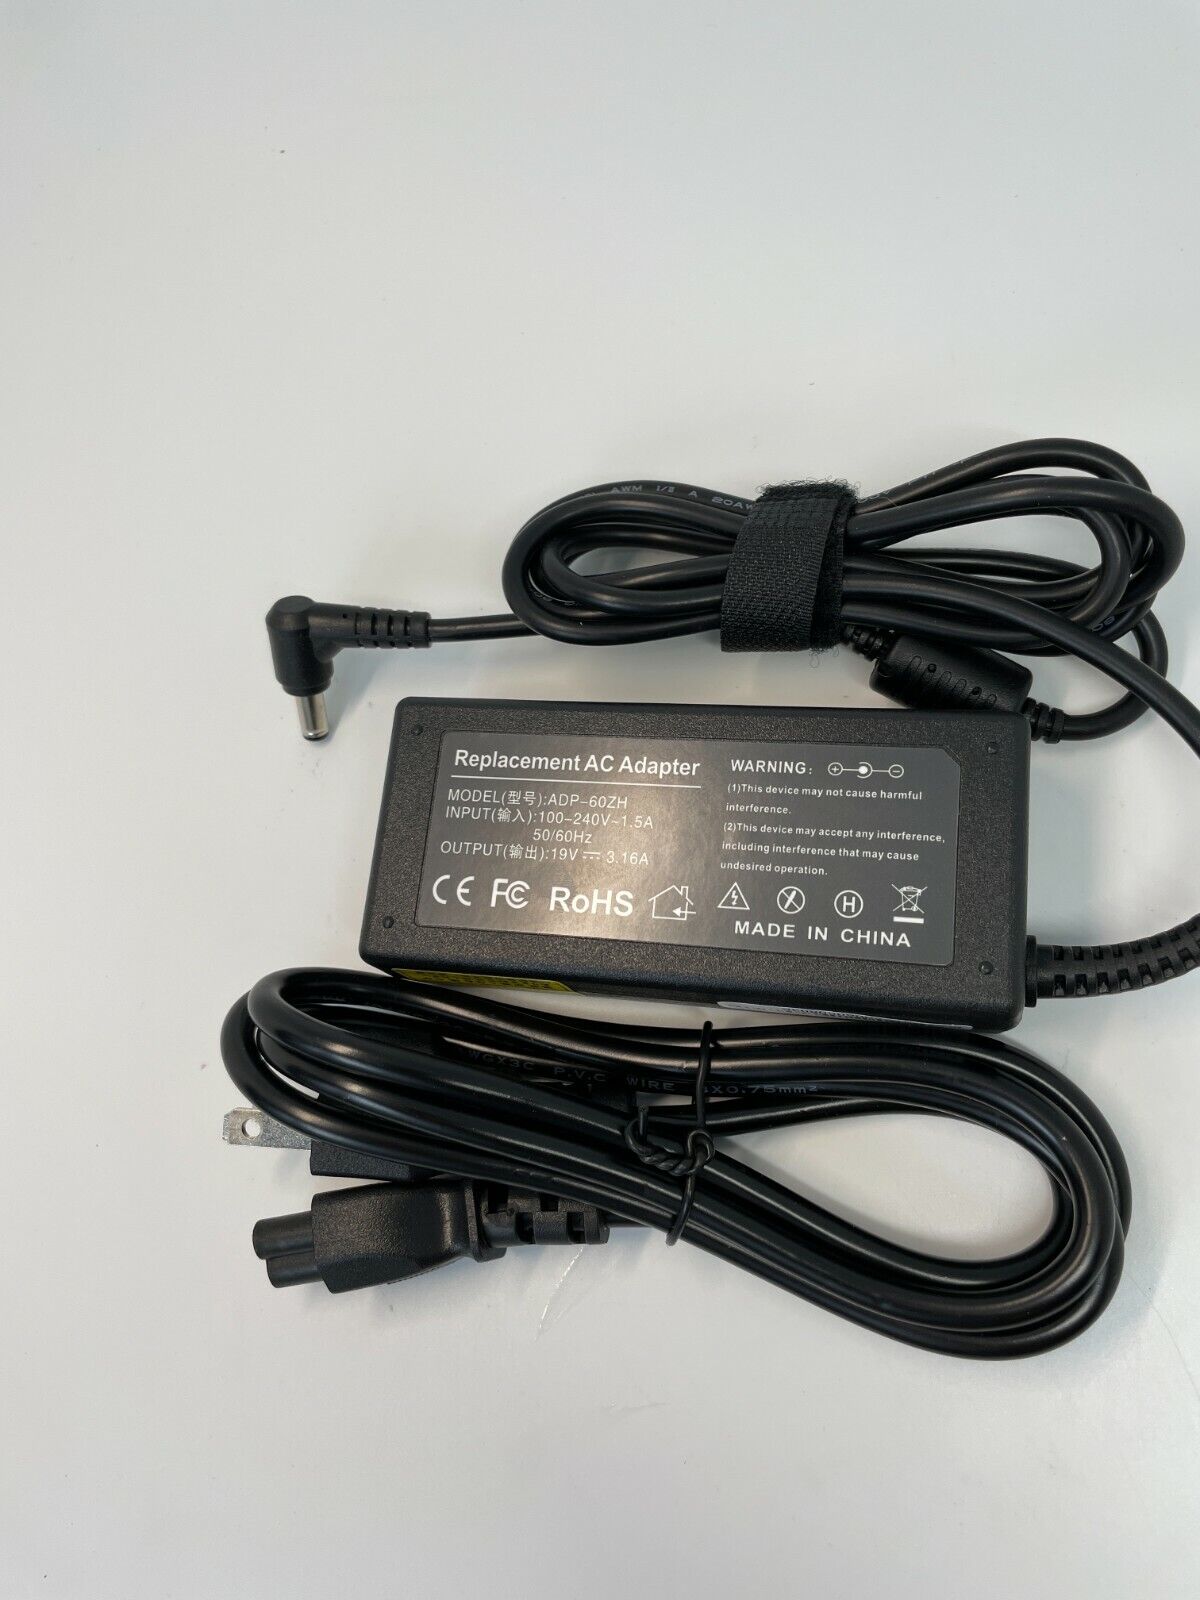 DENAQ AC power adapter charger for Dell inspiron latitude 60W 19V 3.16A 